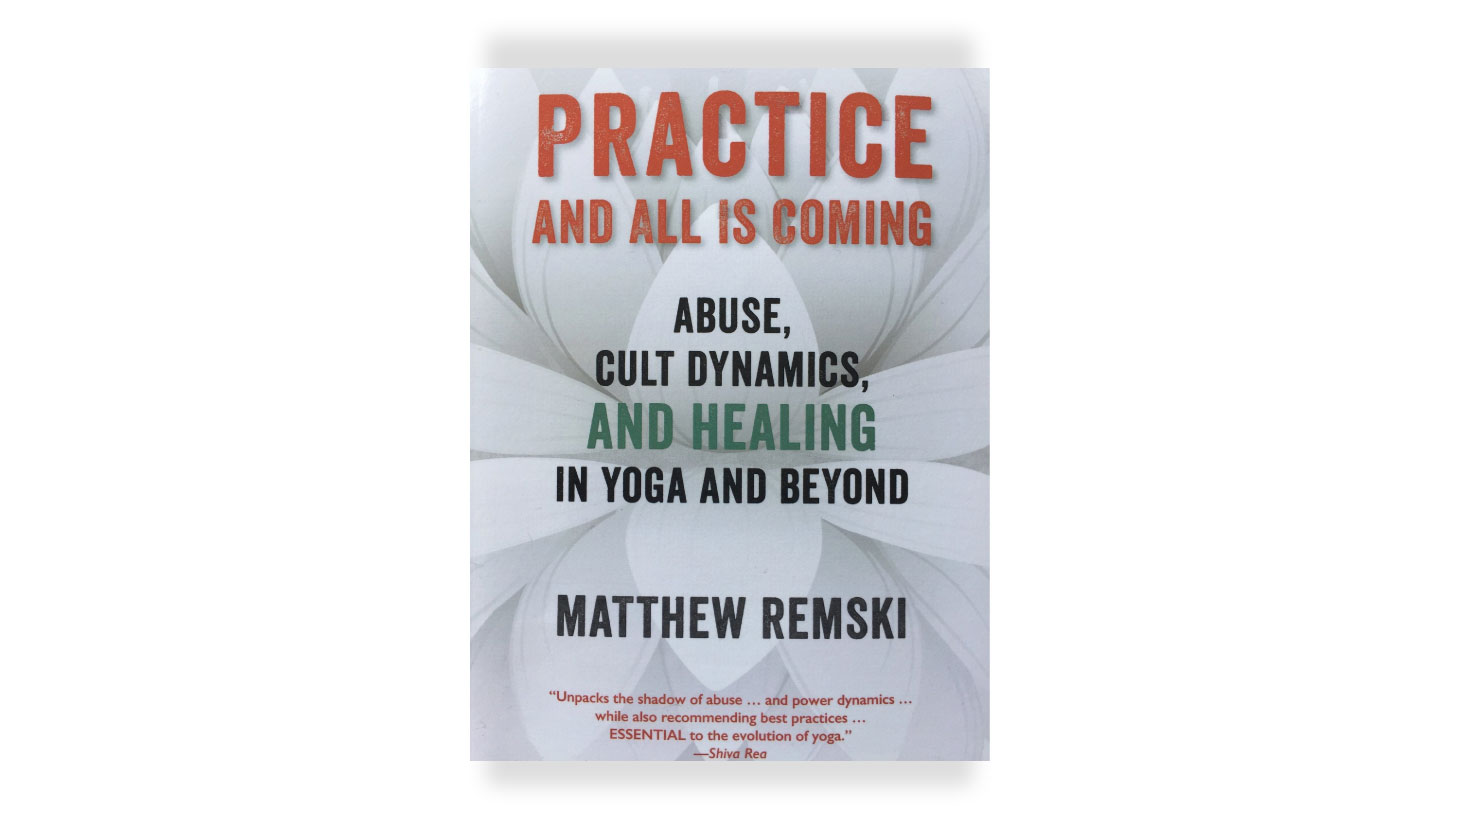 Book-4-Practice-and-All-is-Coming--abuse,-cult-dynamics,-and-healing-in-yoga-and-beyond,-by-Matthew-Remski-